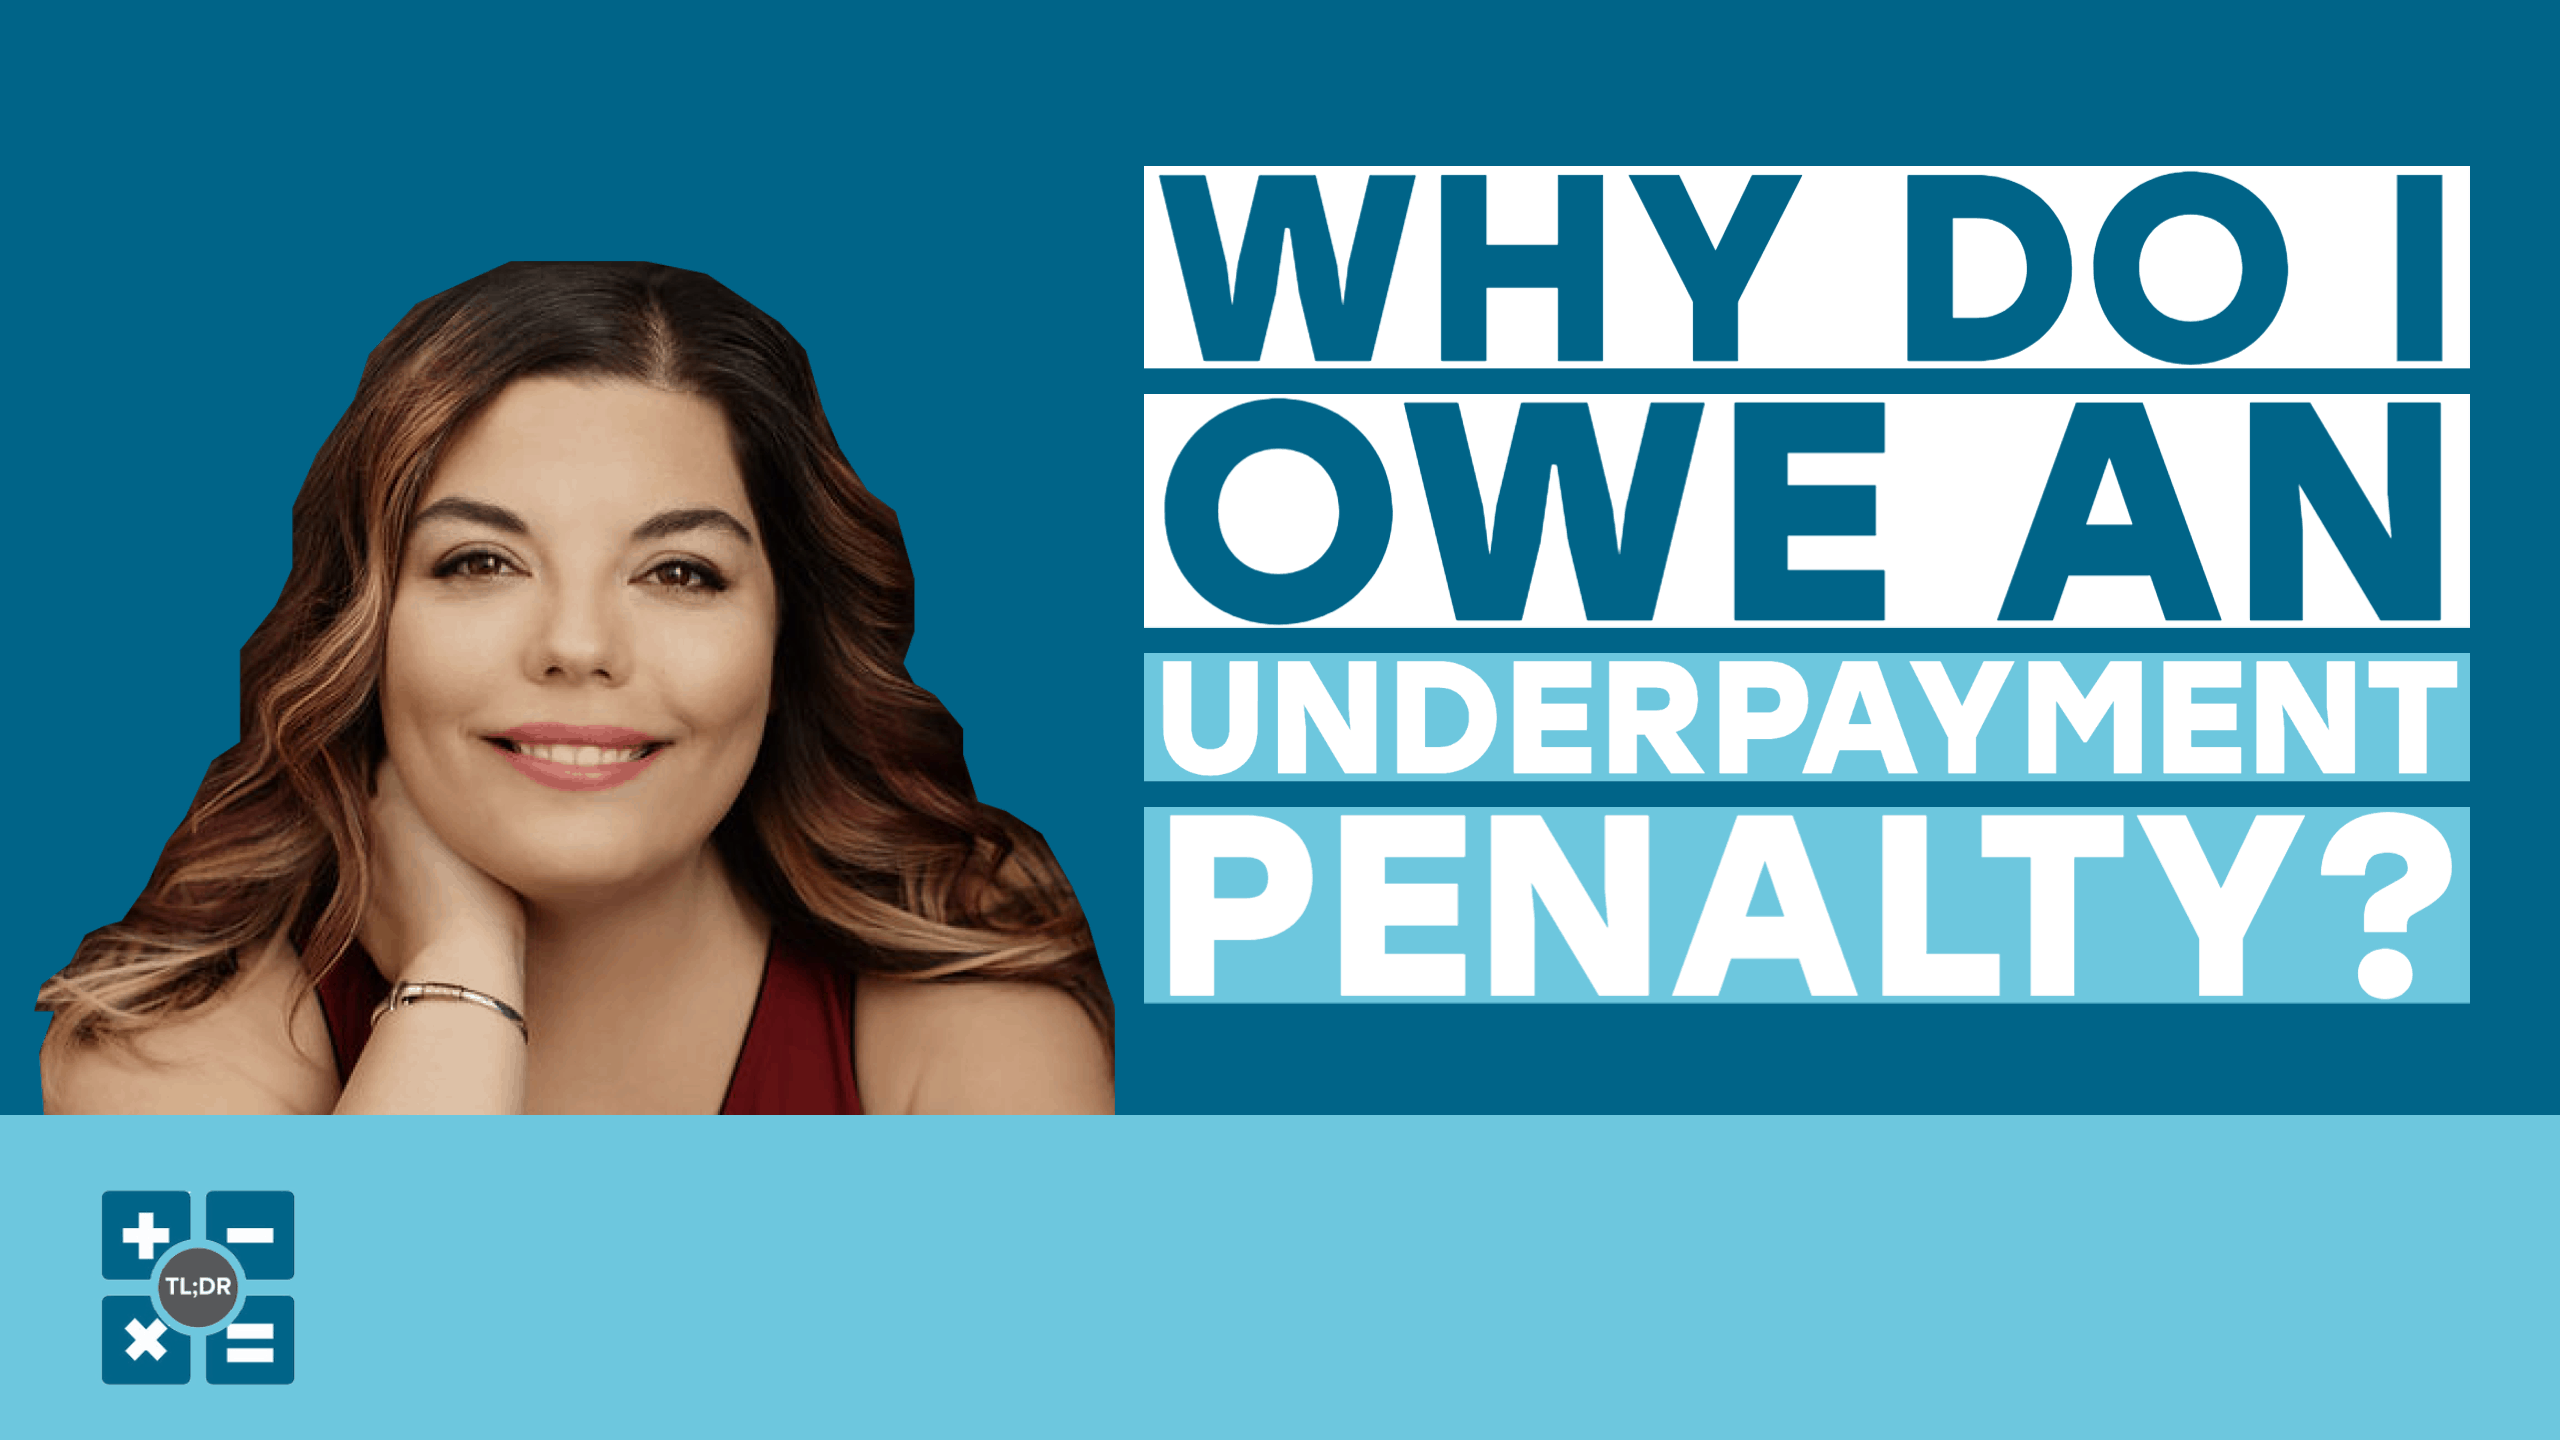 Why Do I Owe an Underpayment Penalty?